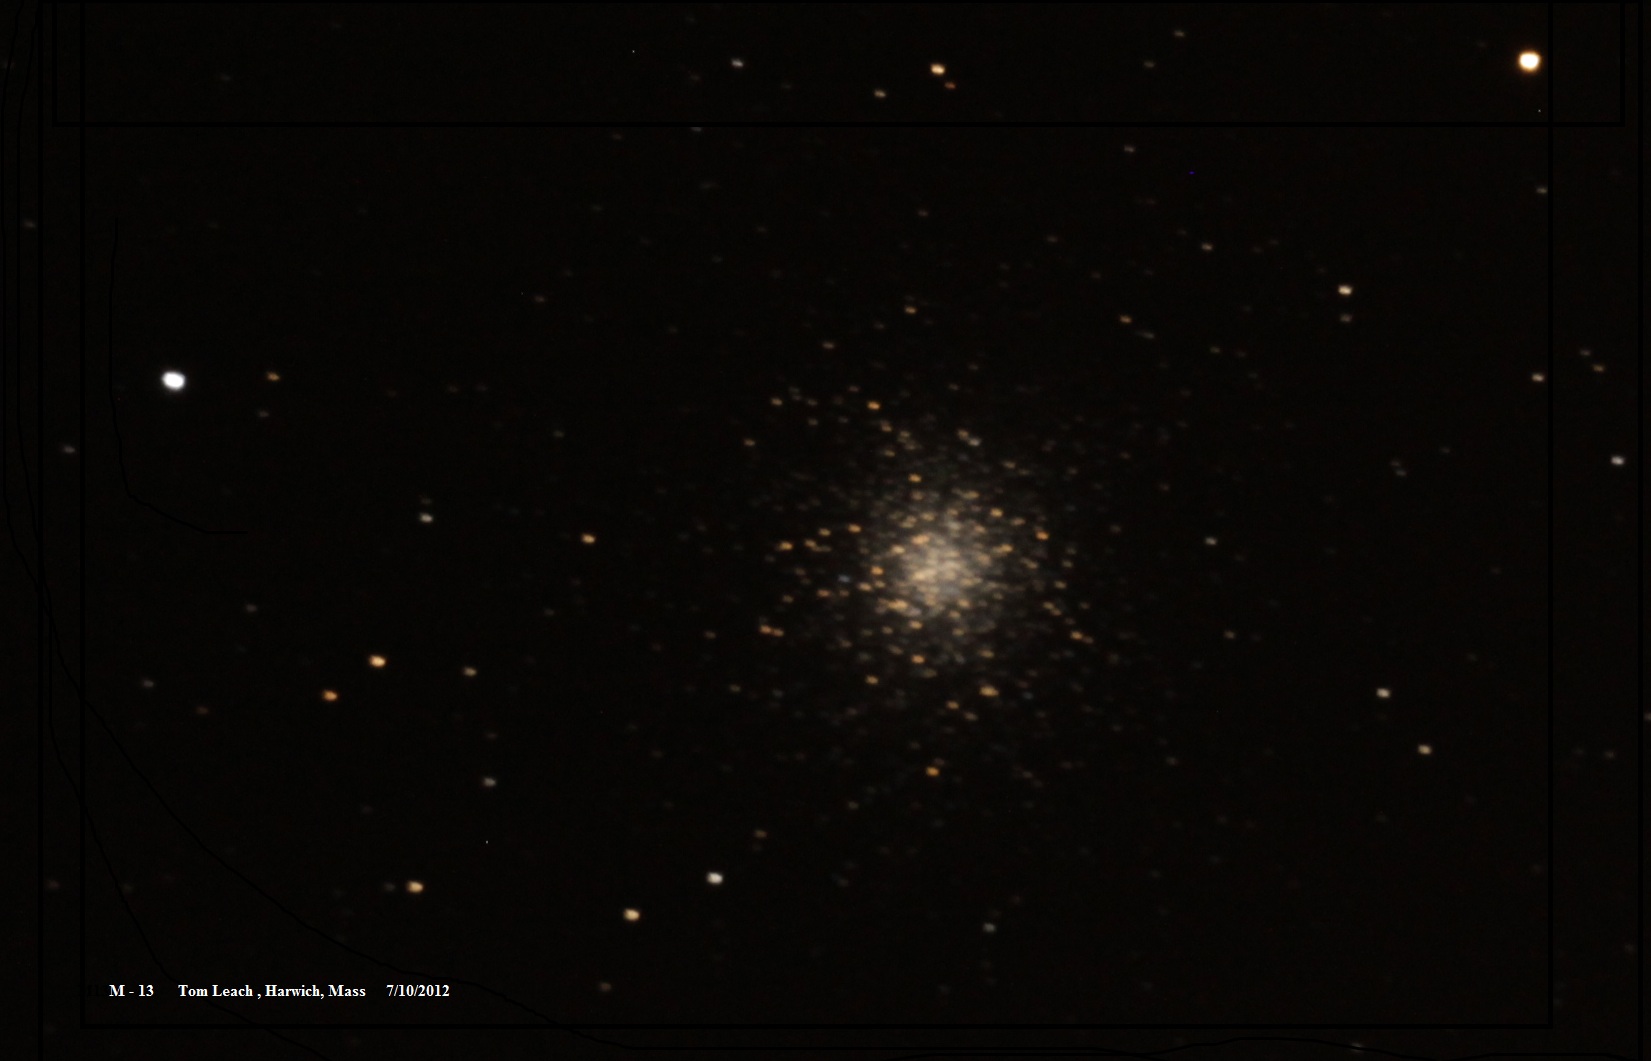 Image of Messier object M13 in consteallation Herrcules, Tom Leach July 2012